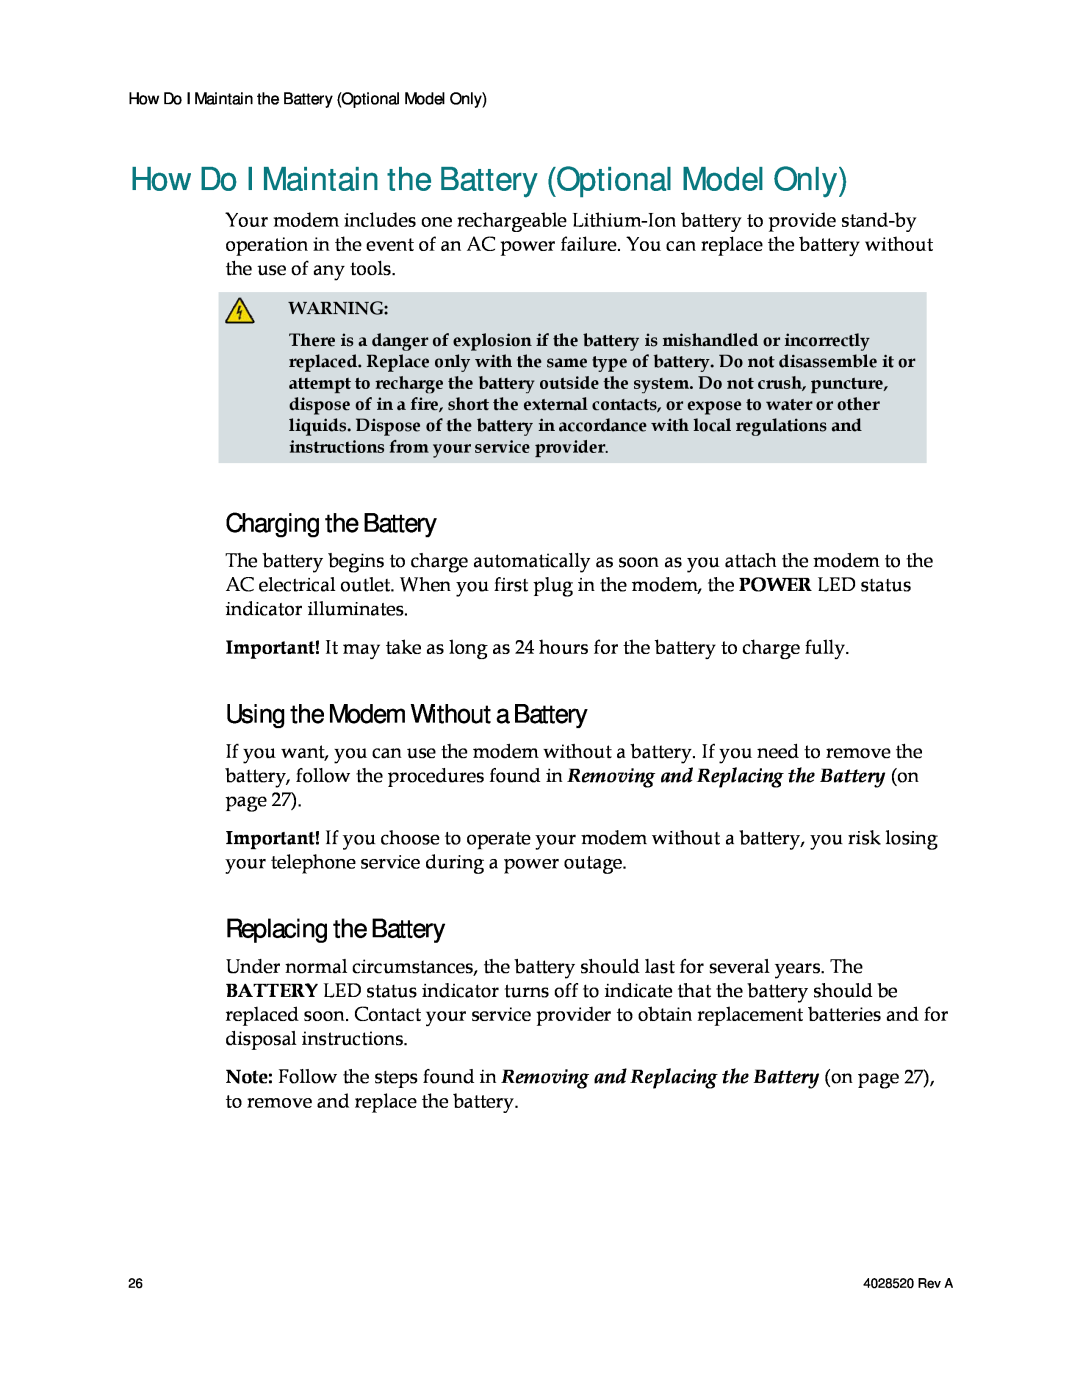 Cisco Systems DPQ2202 How Do I Maintain the Battery Optional Model Only, Charging the Battery, Replacing the Battery 